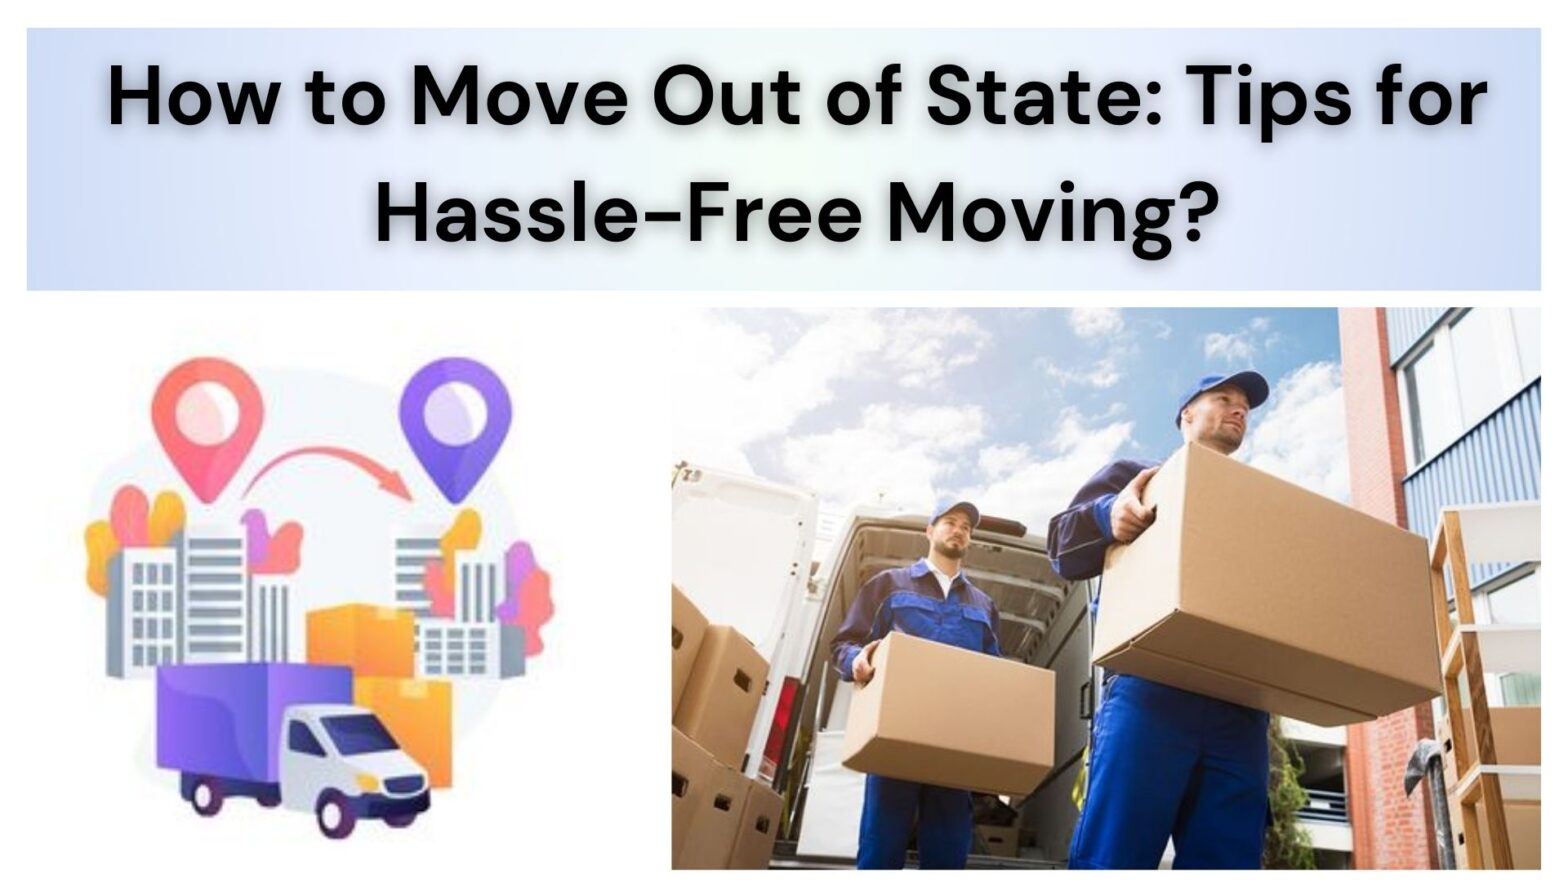 Move out of State